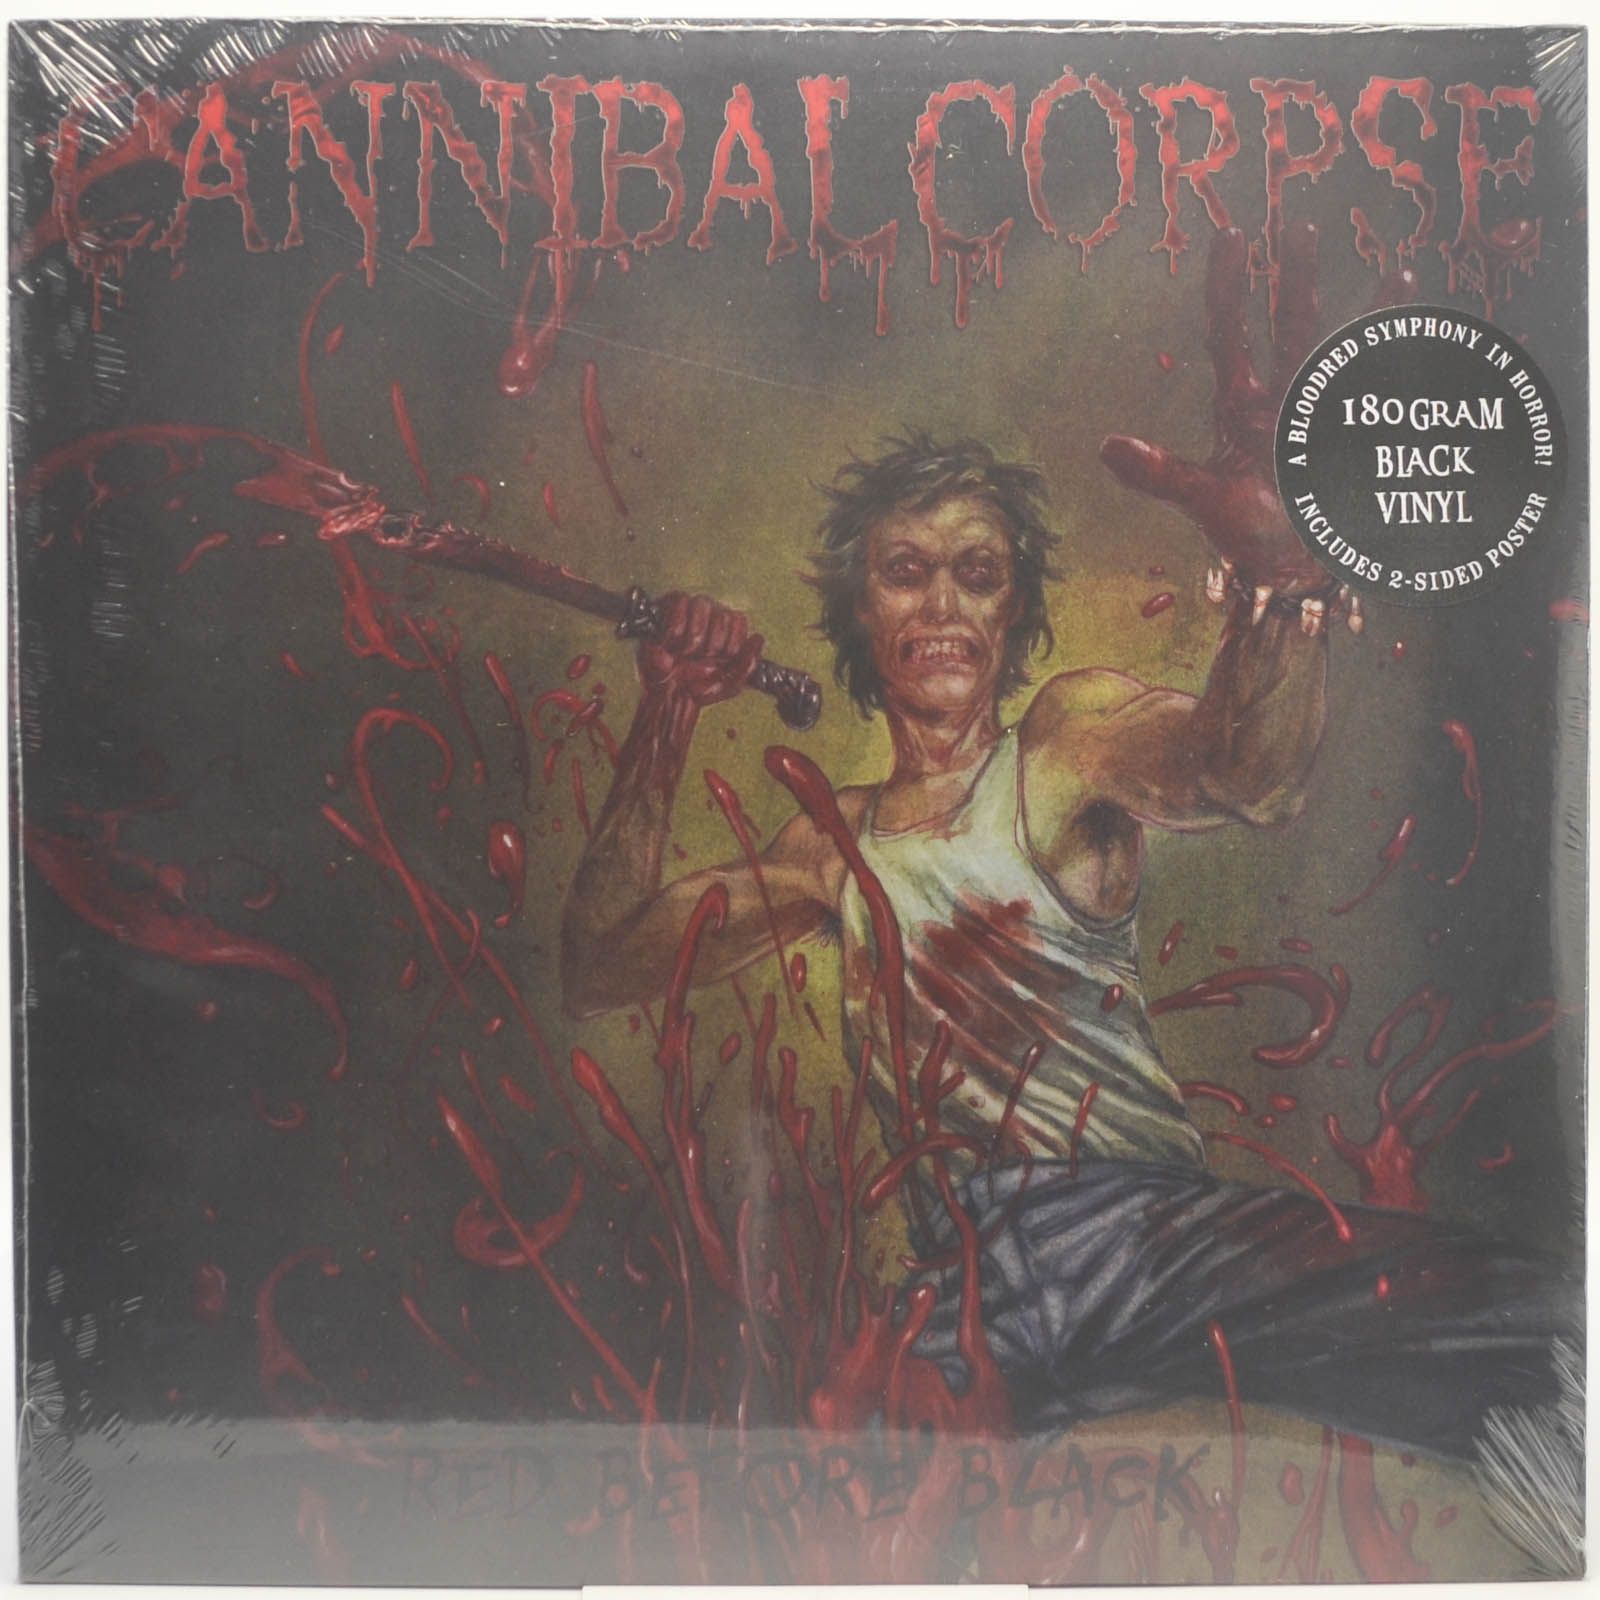 Cannibal Corpse — Red Before Black, 2017